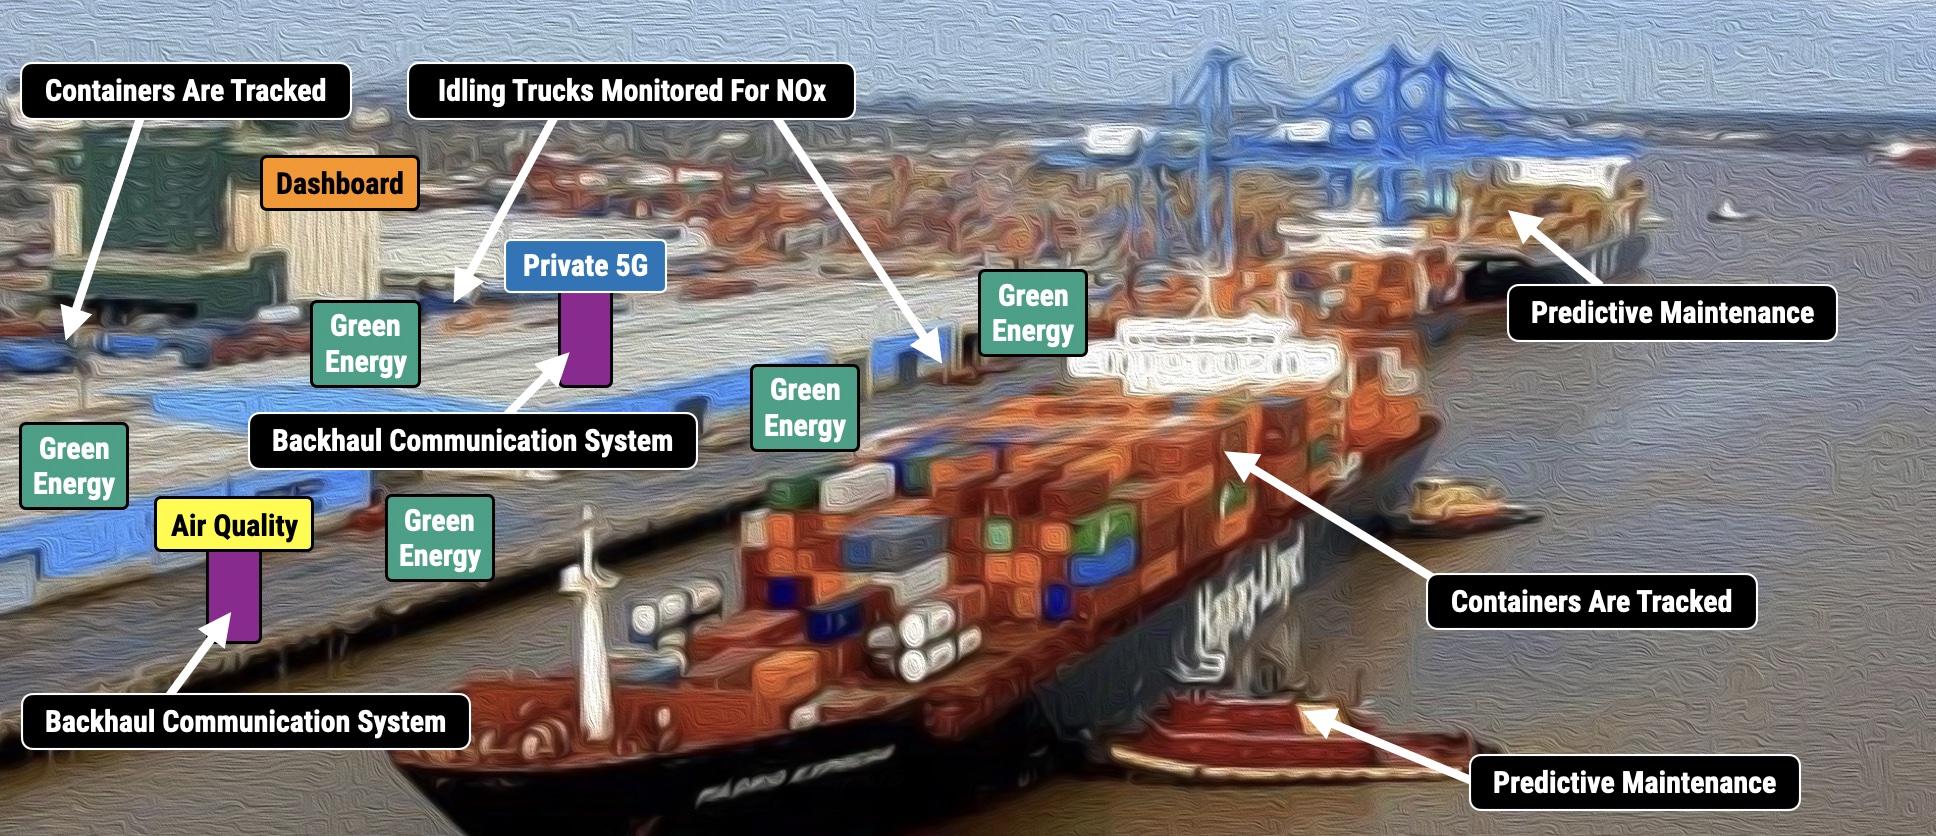 Image Depicting Real-Time Actionable Intelligence & Efficiencies for Ports